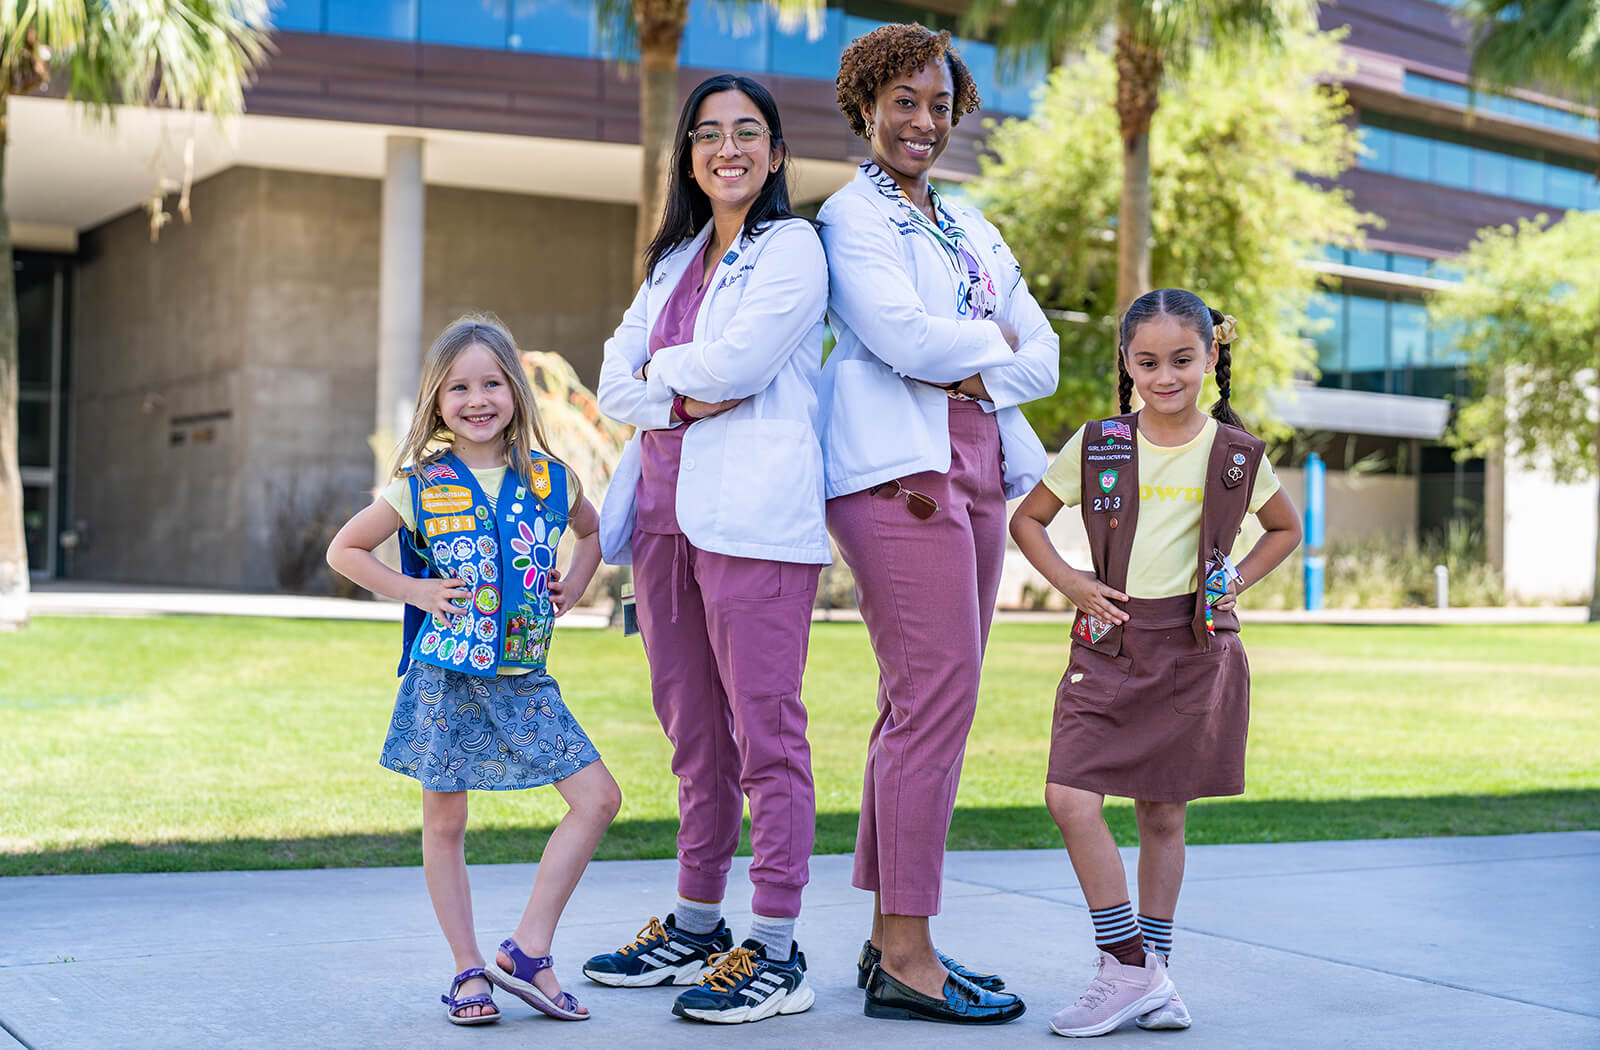 Naria Quazi and Shannon Alsobrooks, Class of 2025 medical students and former Girl Scouts, pose with attendees of the Go Girl Scouts Go STEAM Camp